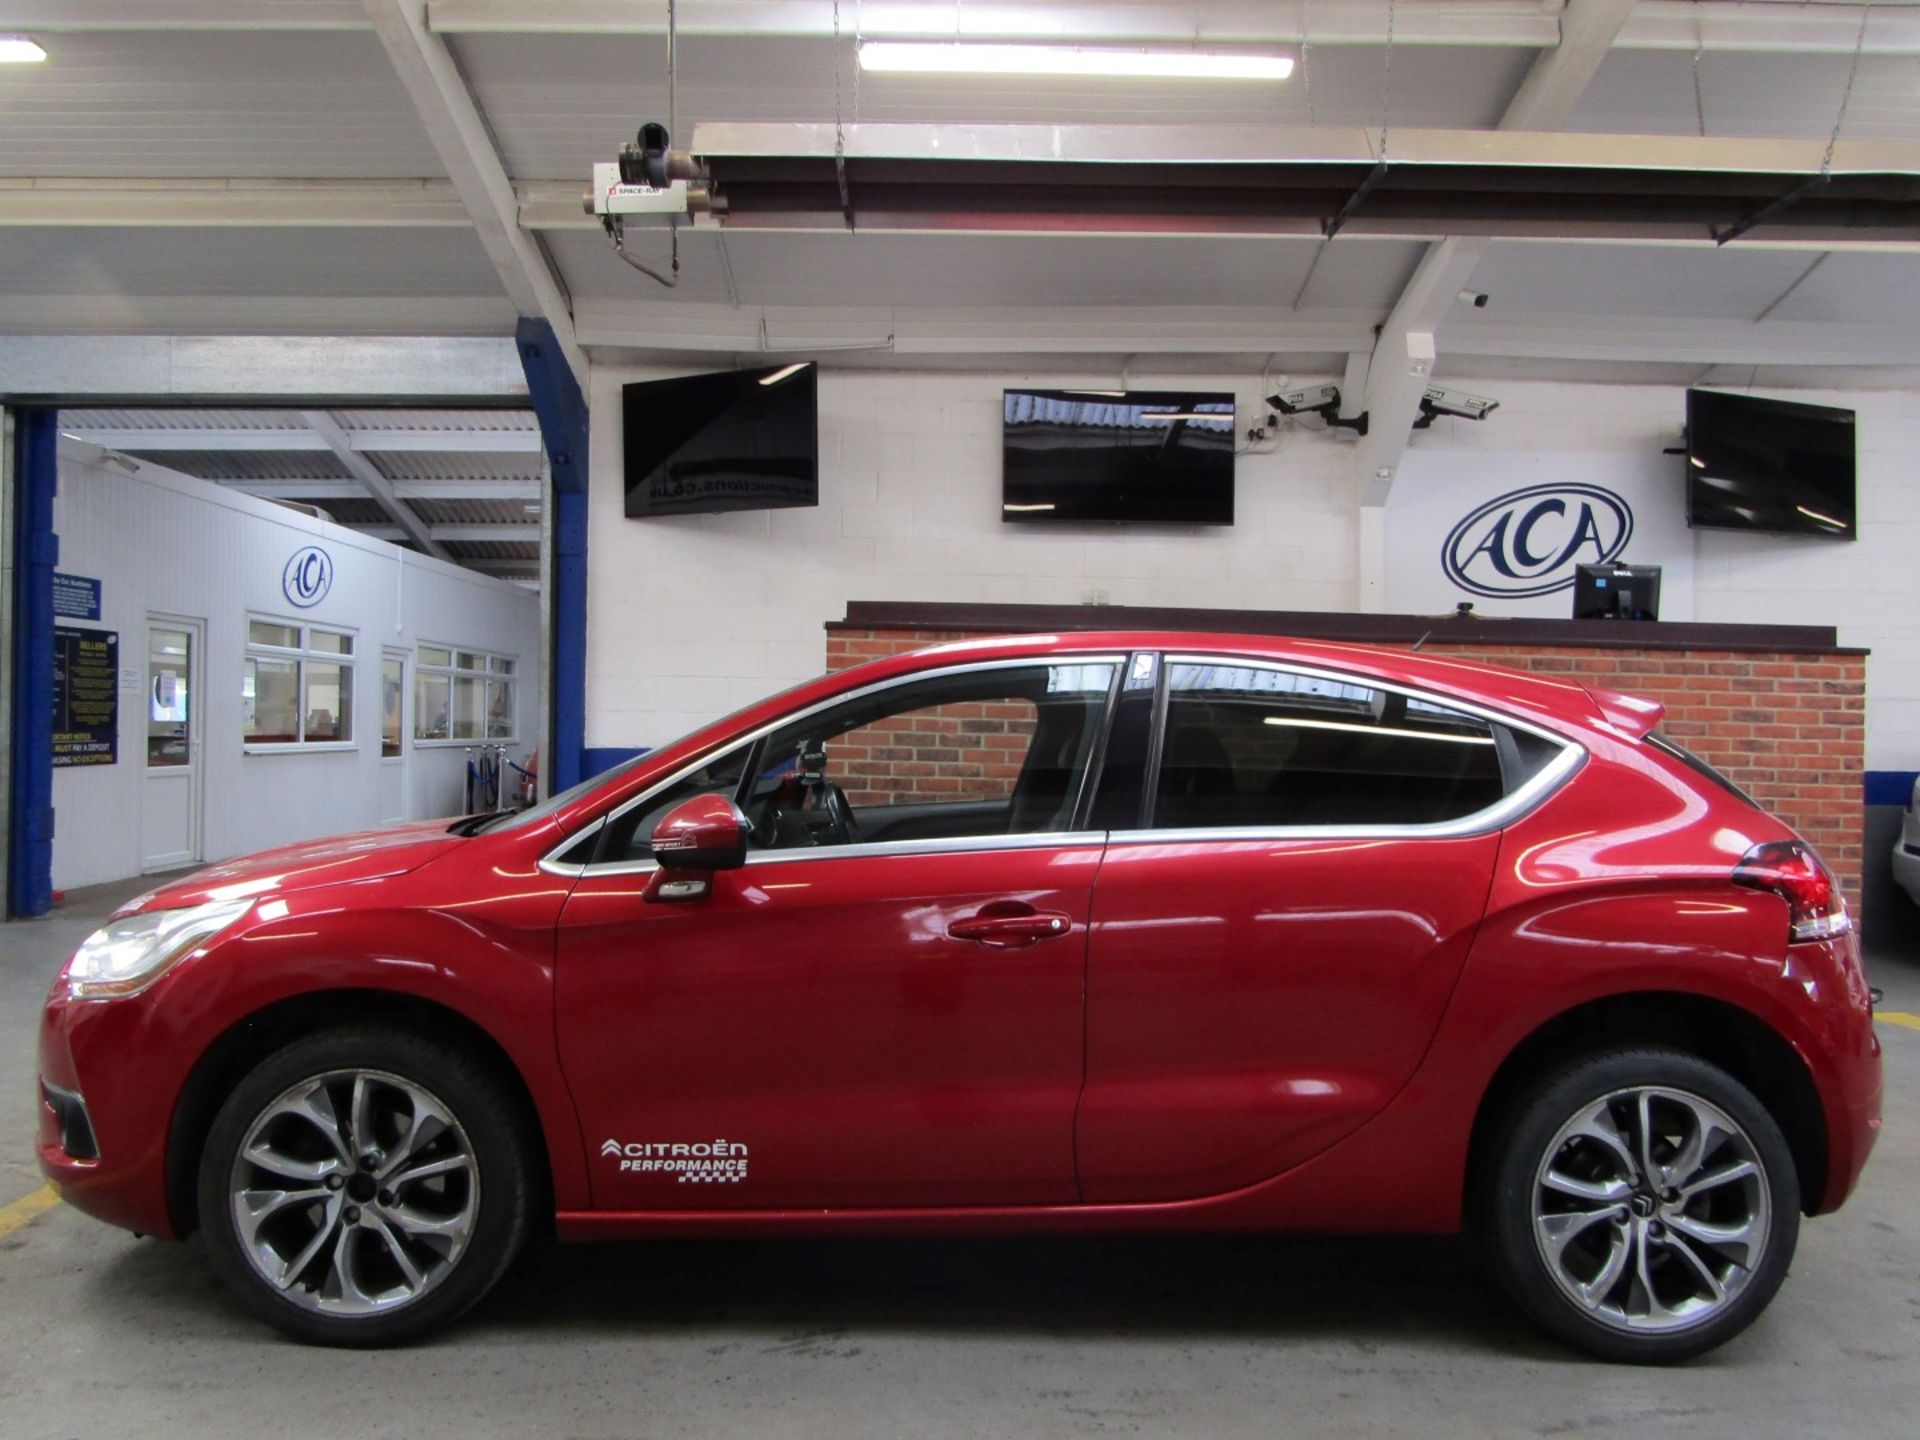 11 11 Citroen DS4 DStyle HDI - Image 25 of 25